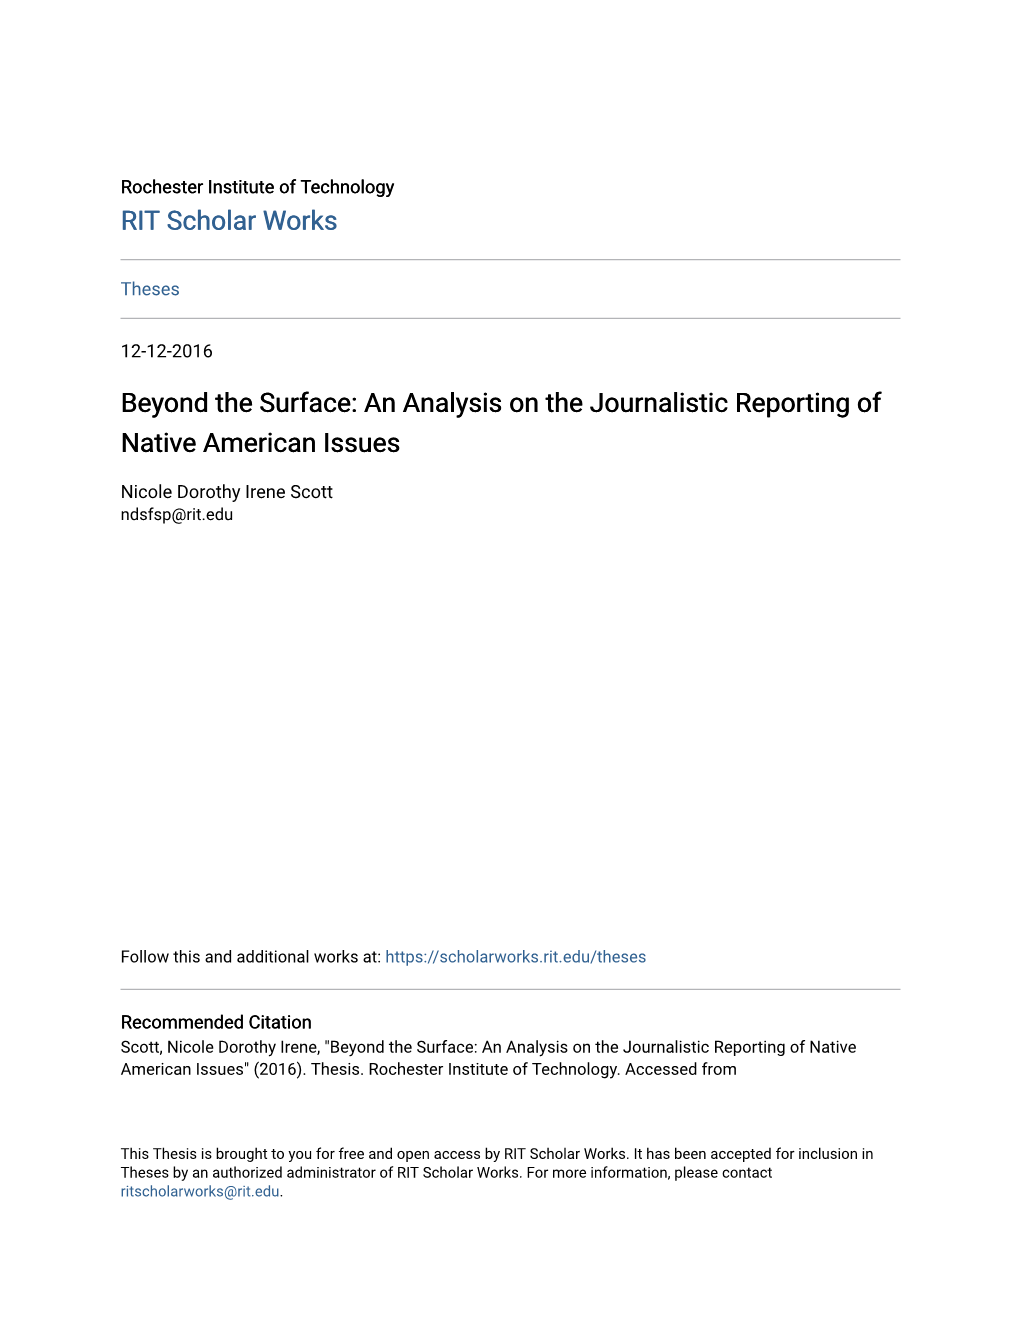 An Analysis on the Journalistic Reporting of Native American Issues